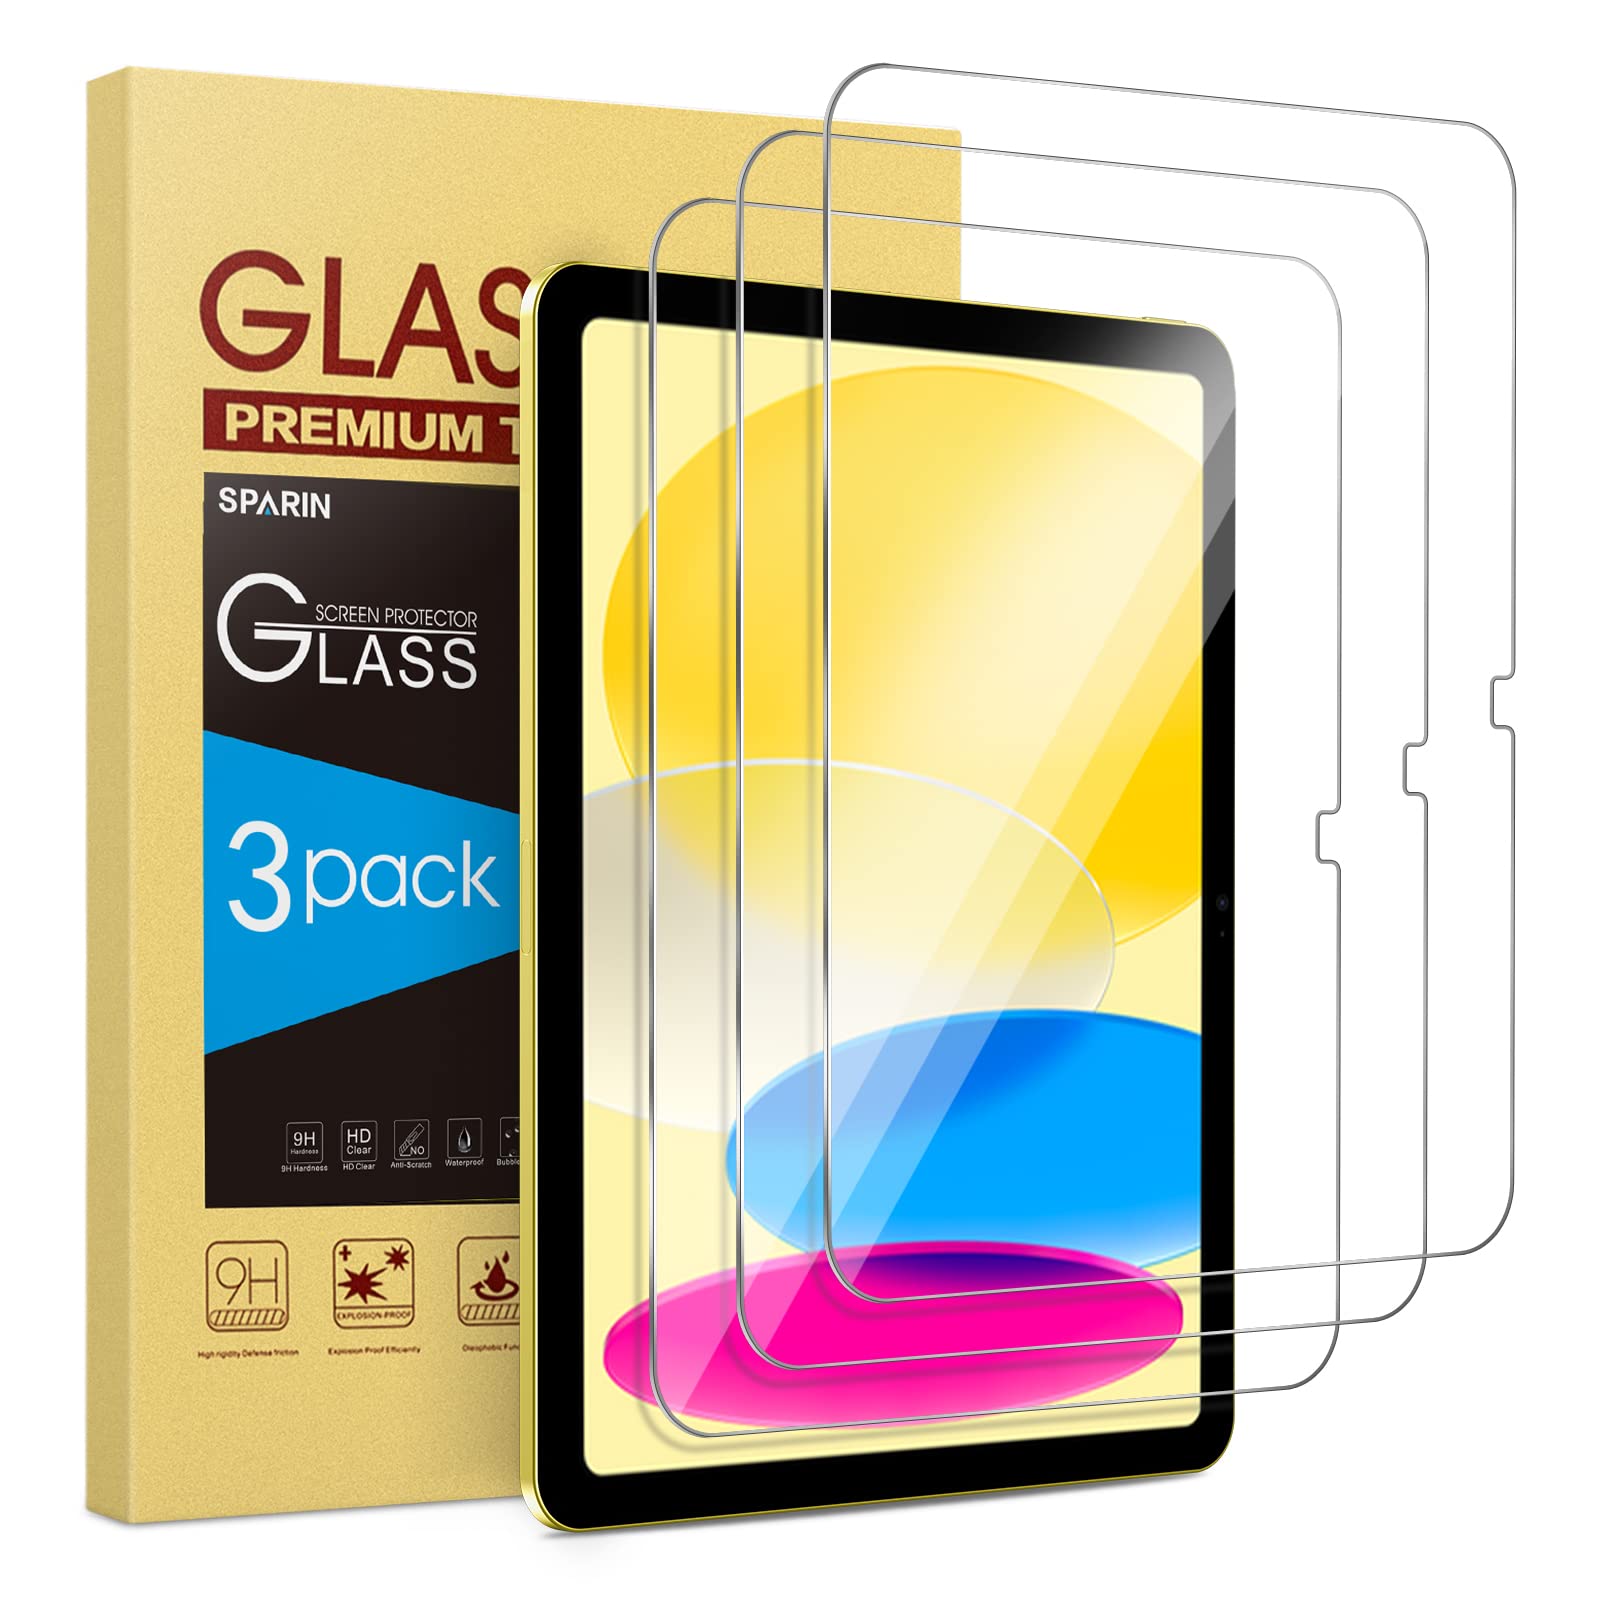 3 Pack SPARIN Upgrade Screen Protector for iPad 10th Generation 10.9 Inch (2022 Released), Anti-Scratch Tempered Glass Compatible for iPad 10 Gen, HD Clarity